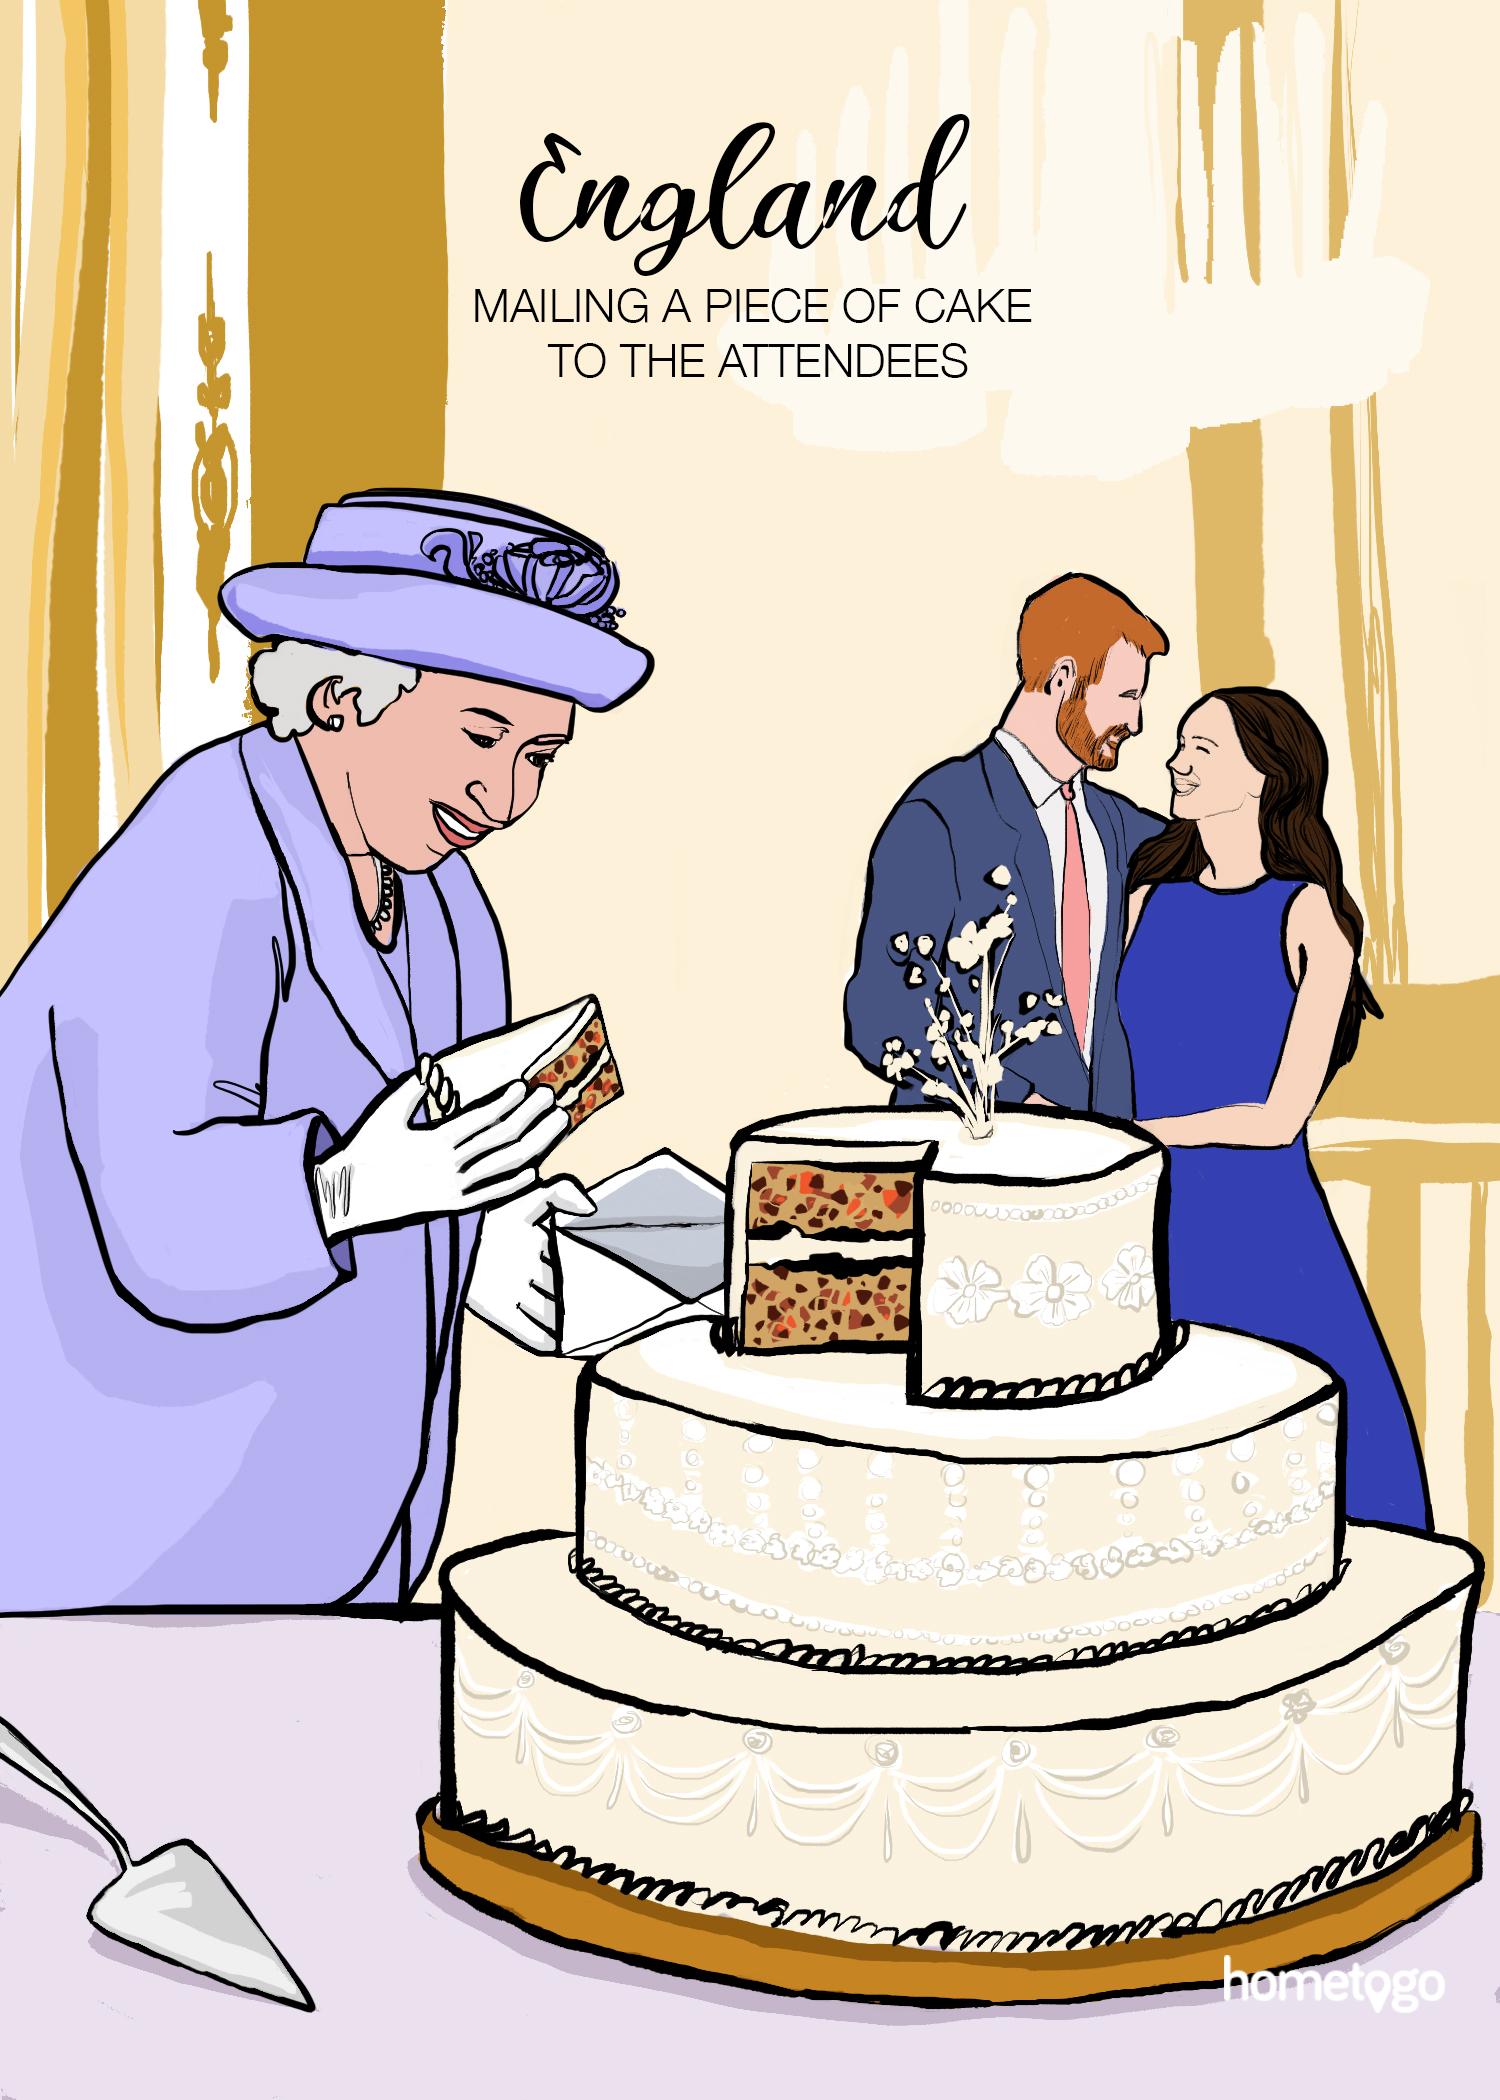 Illustration featuring the wedding custom from the royal wedding, where attendees are mailed a piece of cake after the celebration